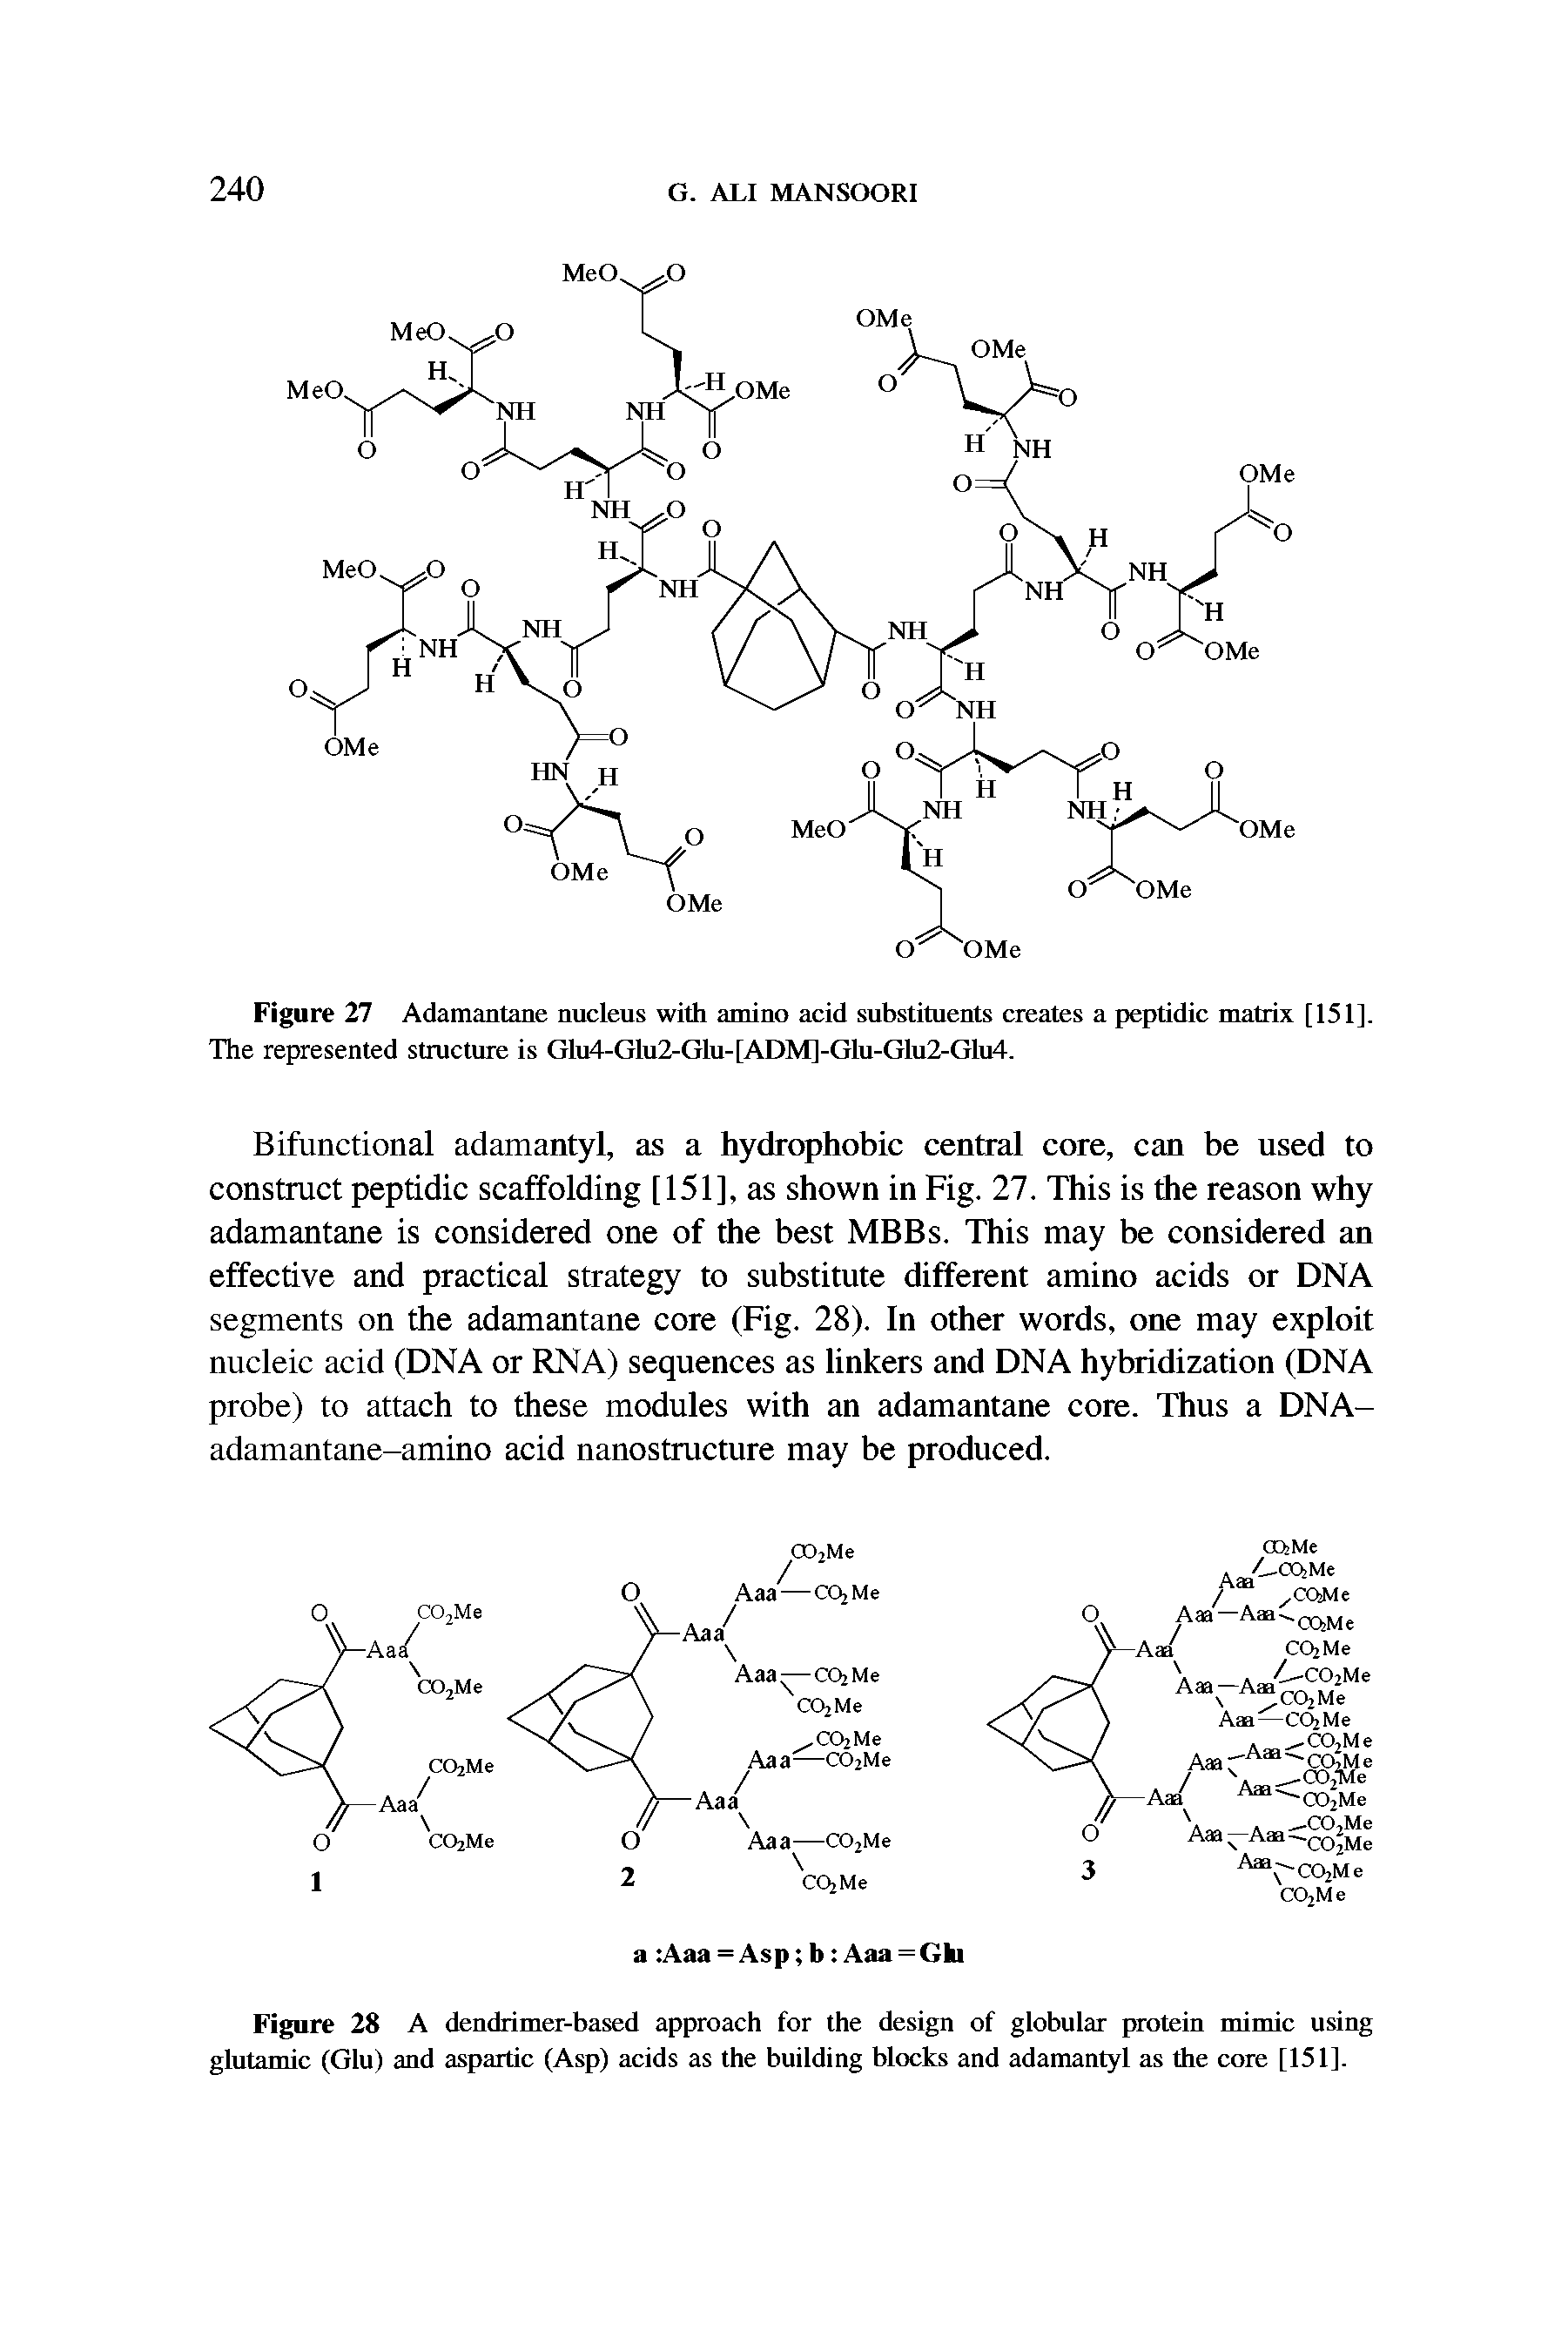 Figure 28 A dendrimer-based approach for the design of globular protein mimic using glutamic (Glu) and aspartic (Asp) acids as the building blocks and adamantyl as the core [151].